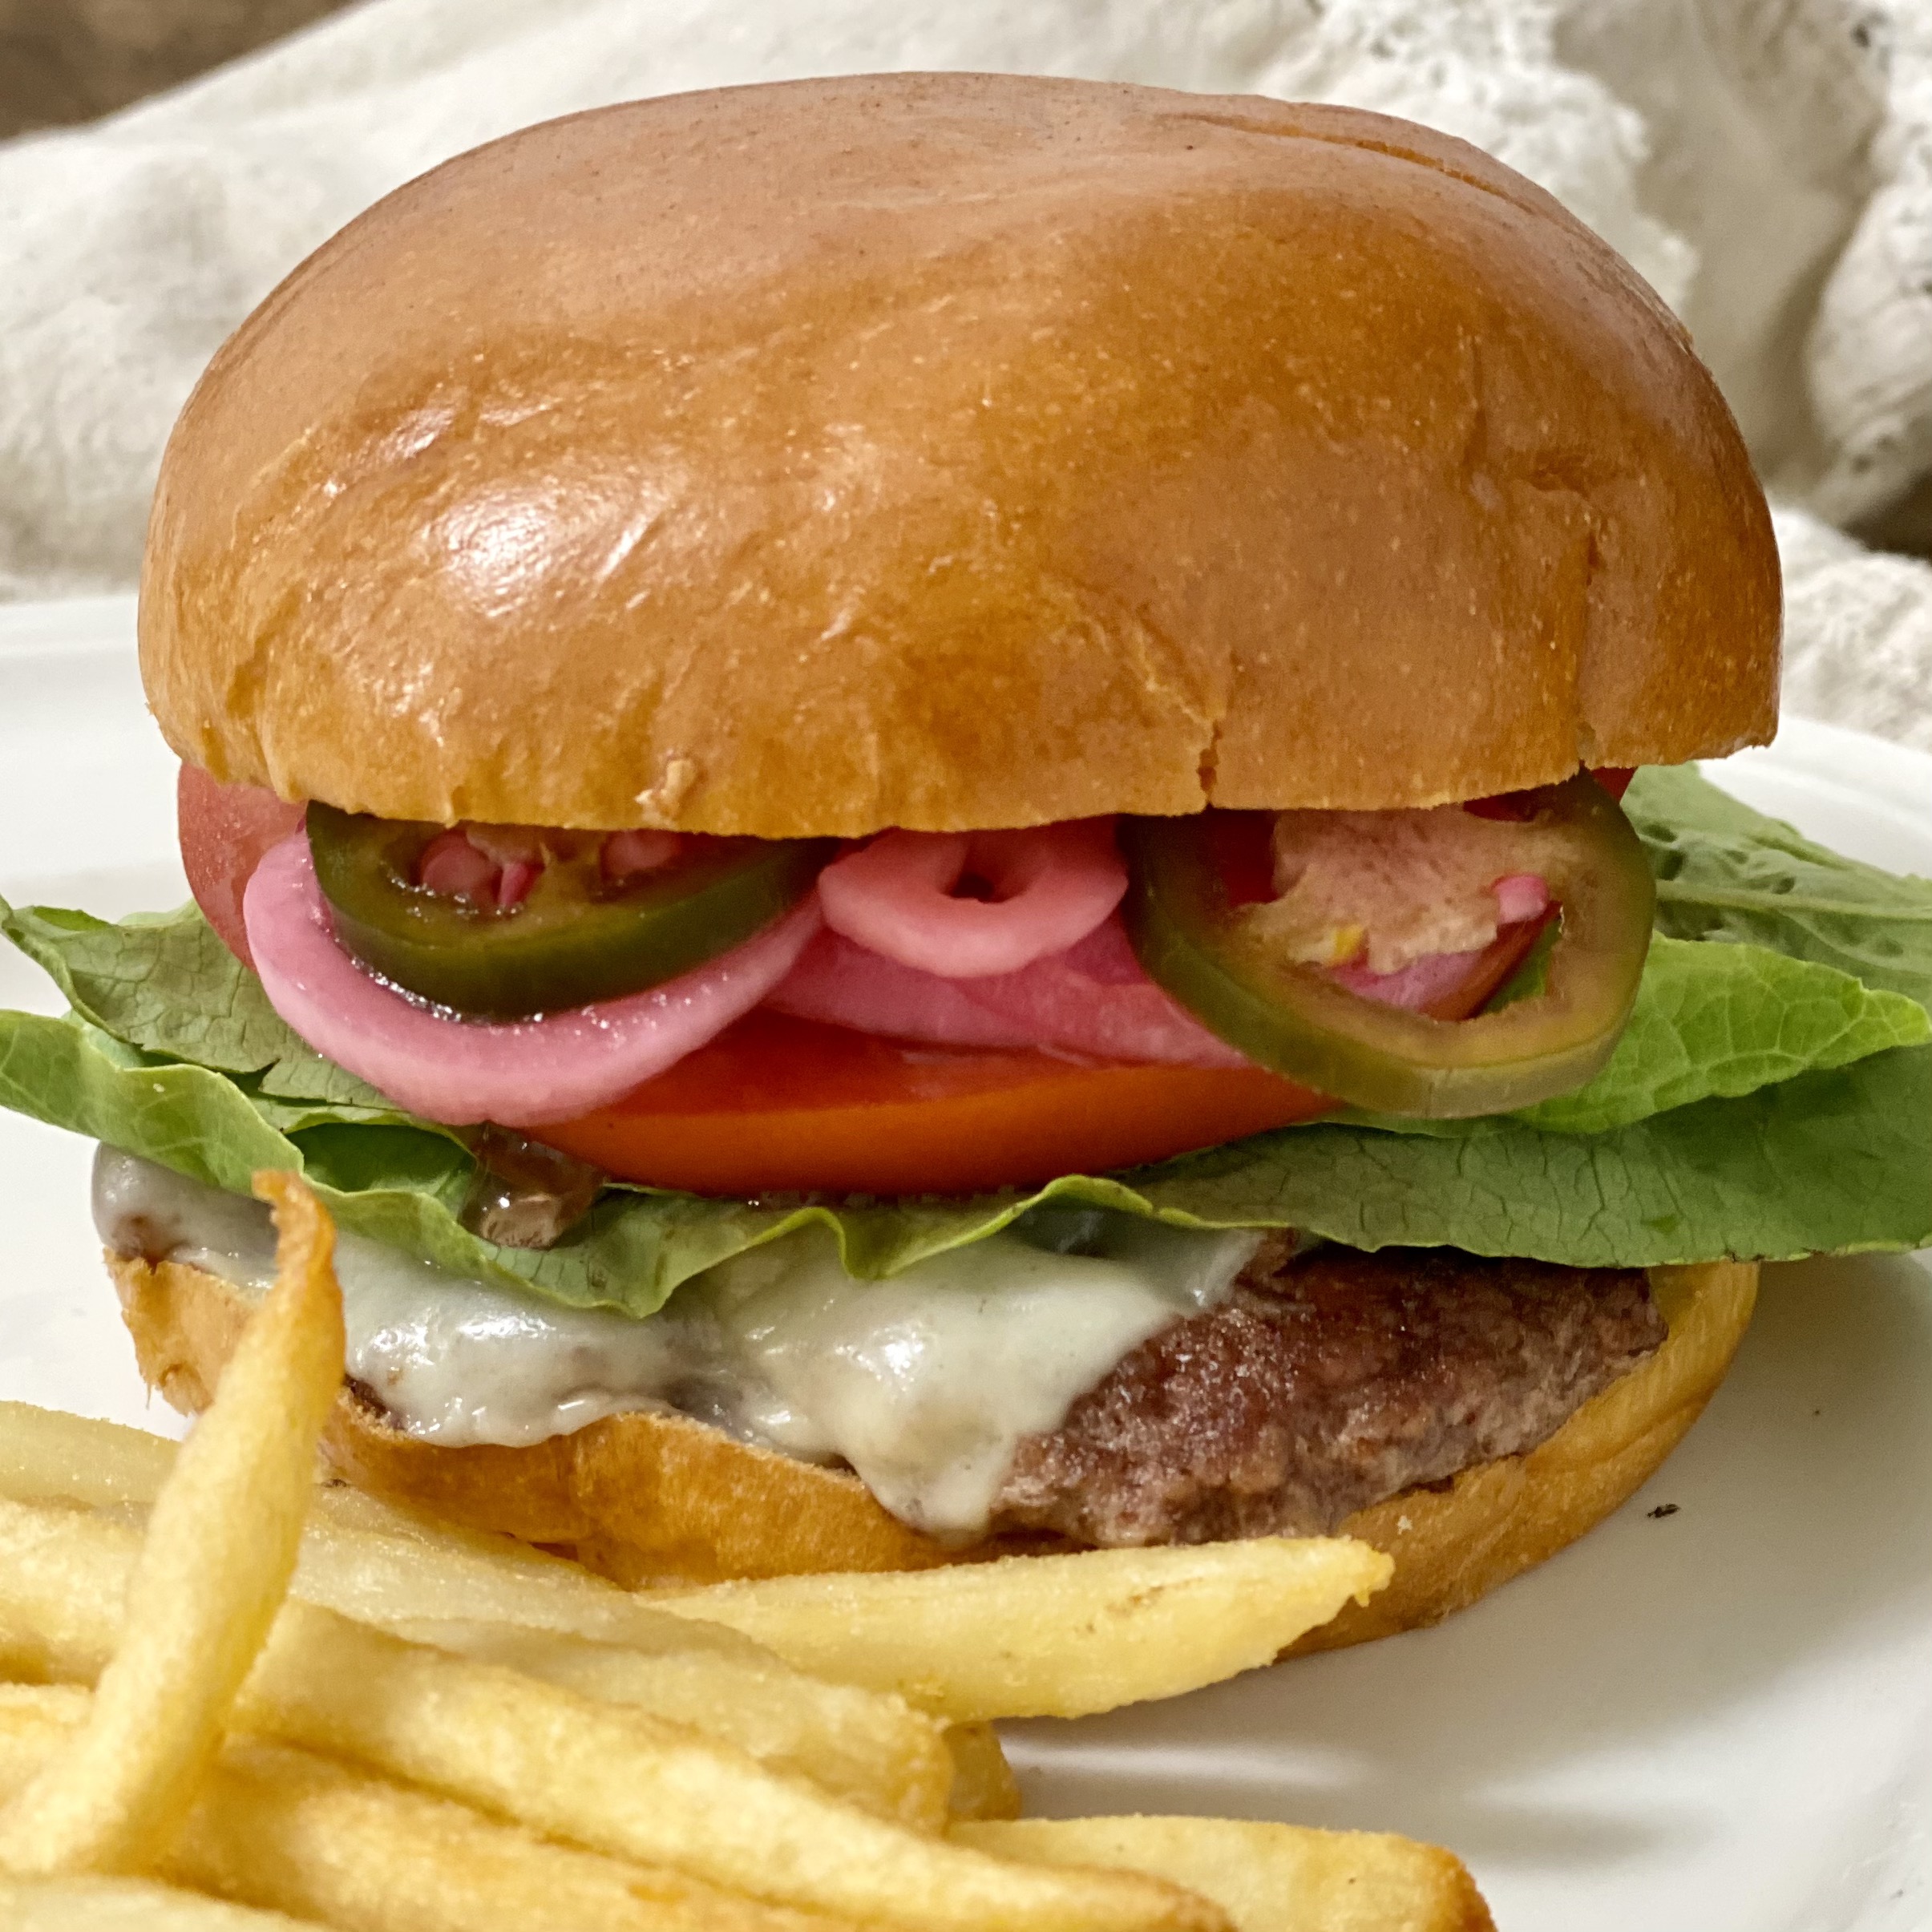 A cheeseburger with pickled red onions, lettuce and tomato on it.